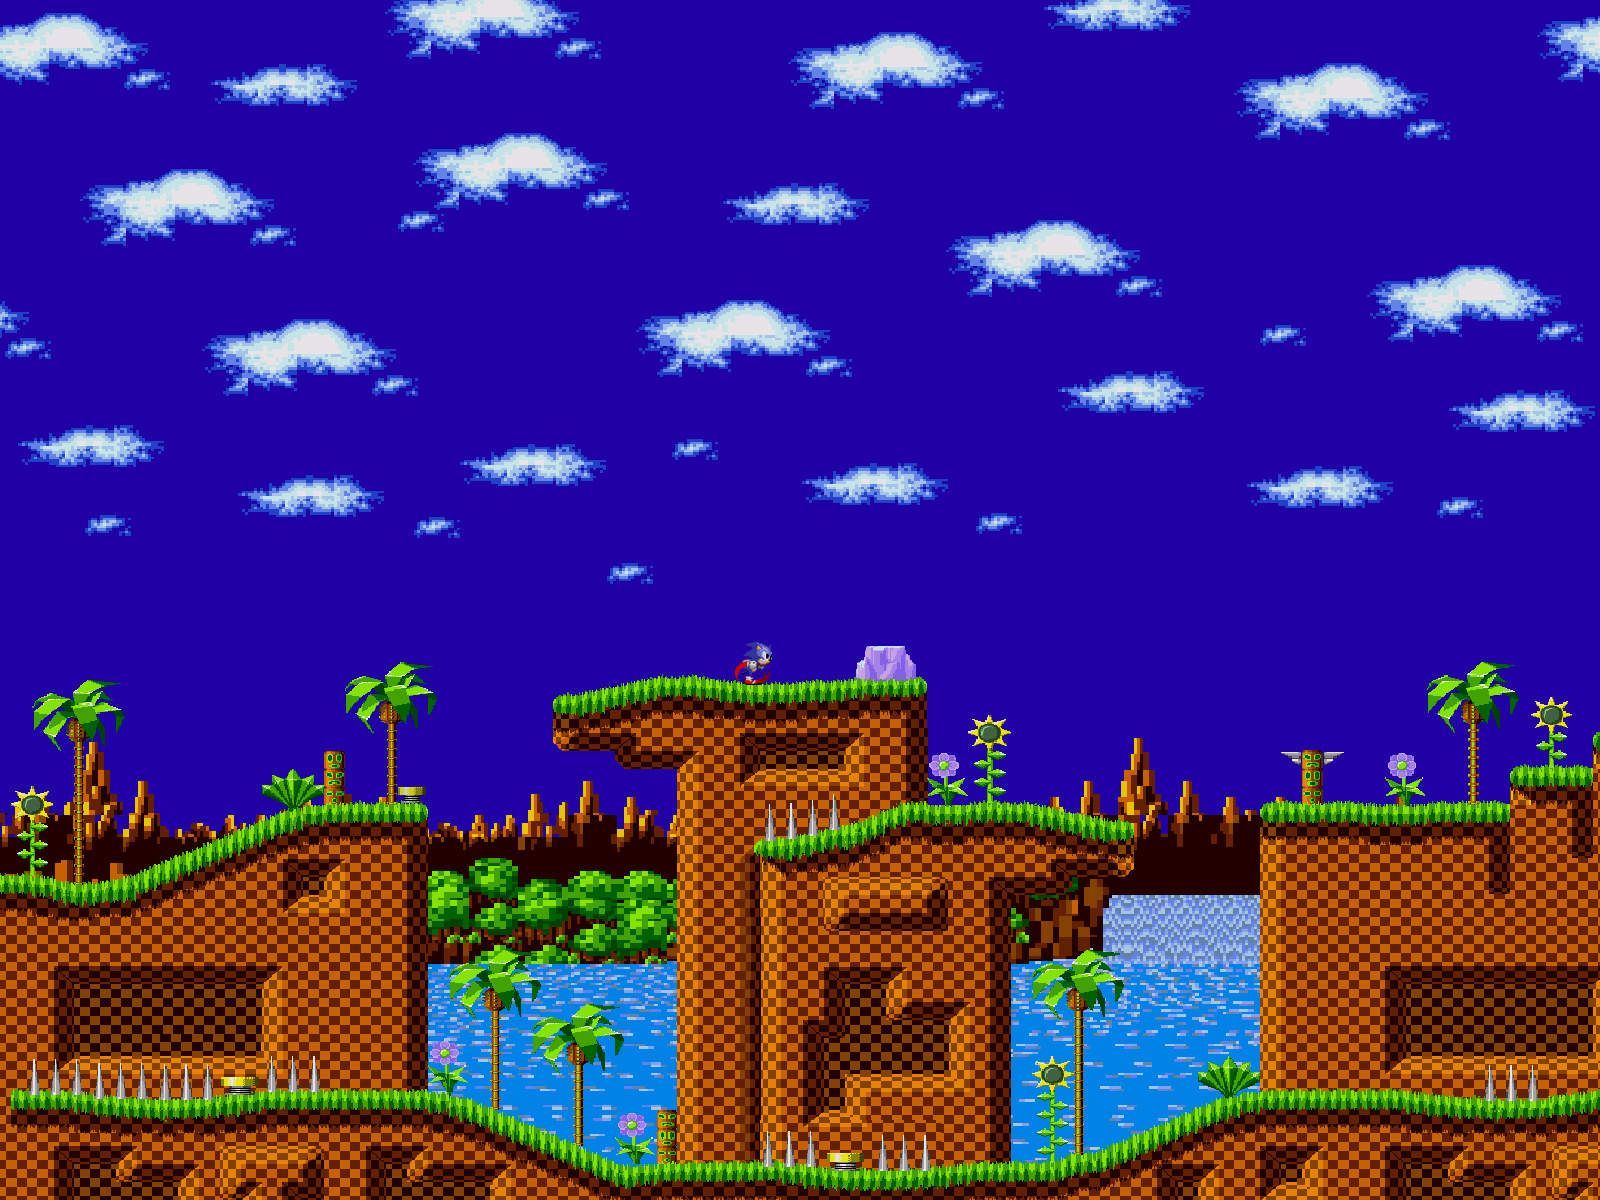 Green Hill Zone HD Backgrounds Free Download 